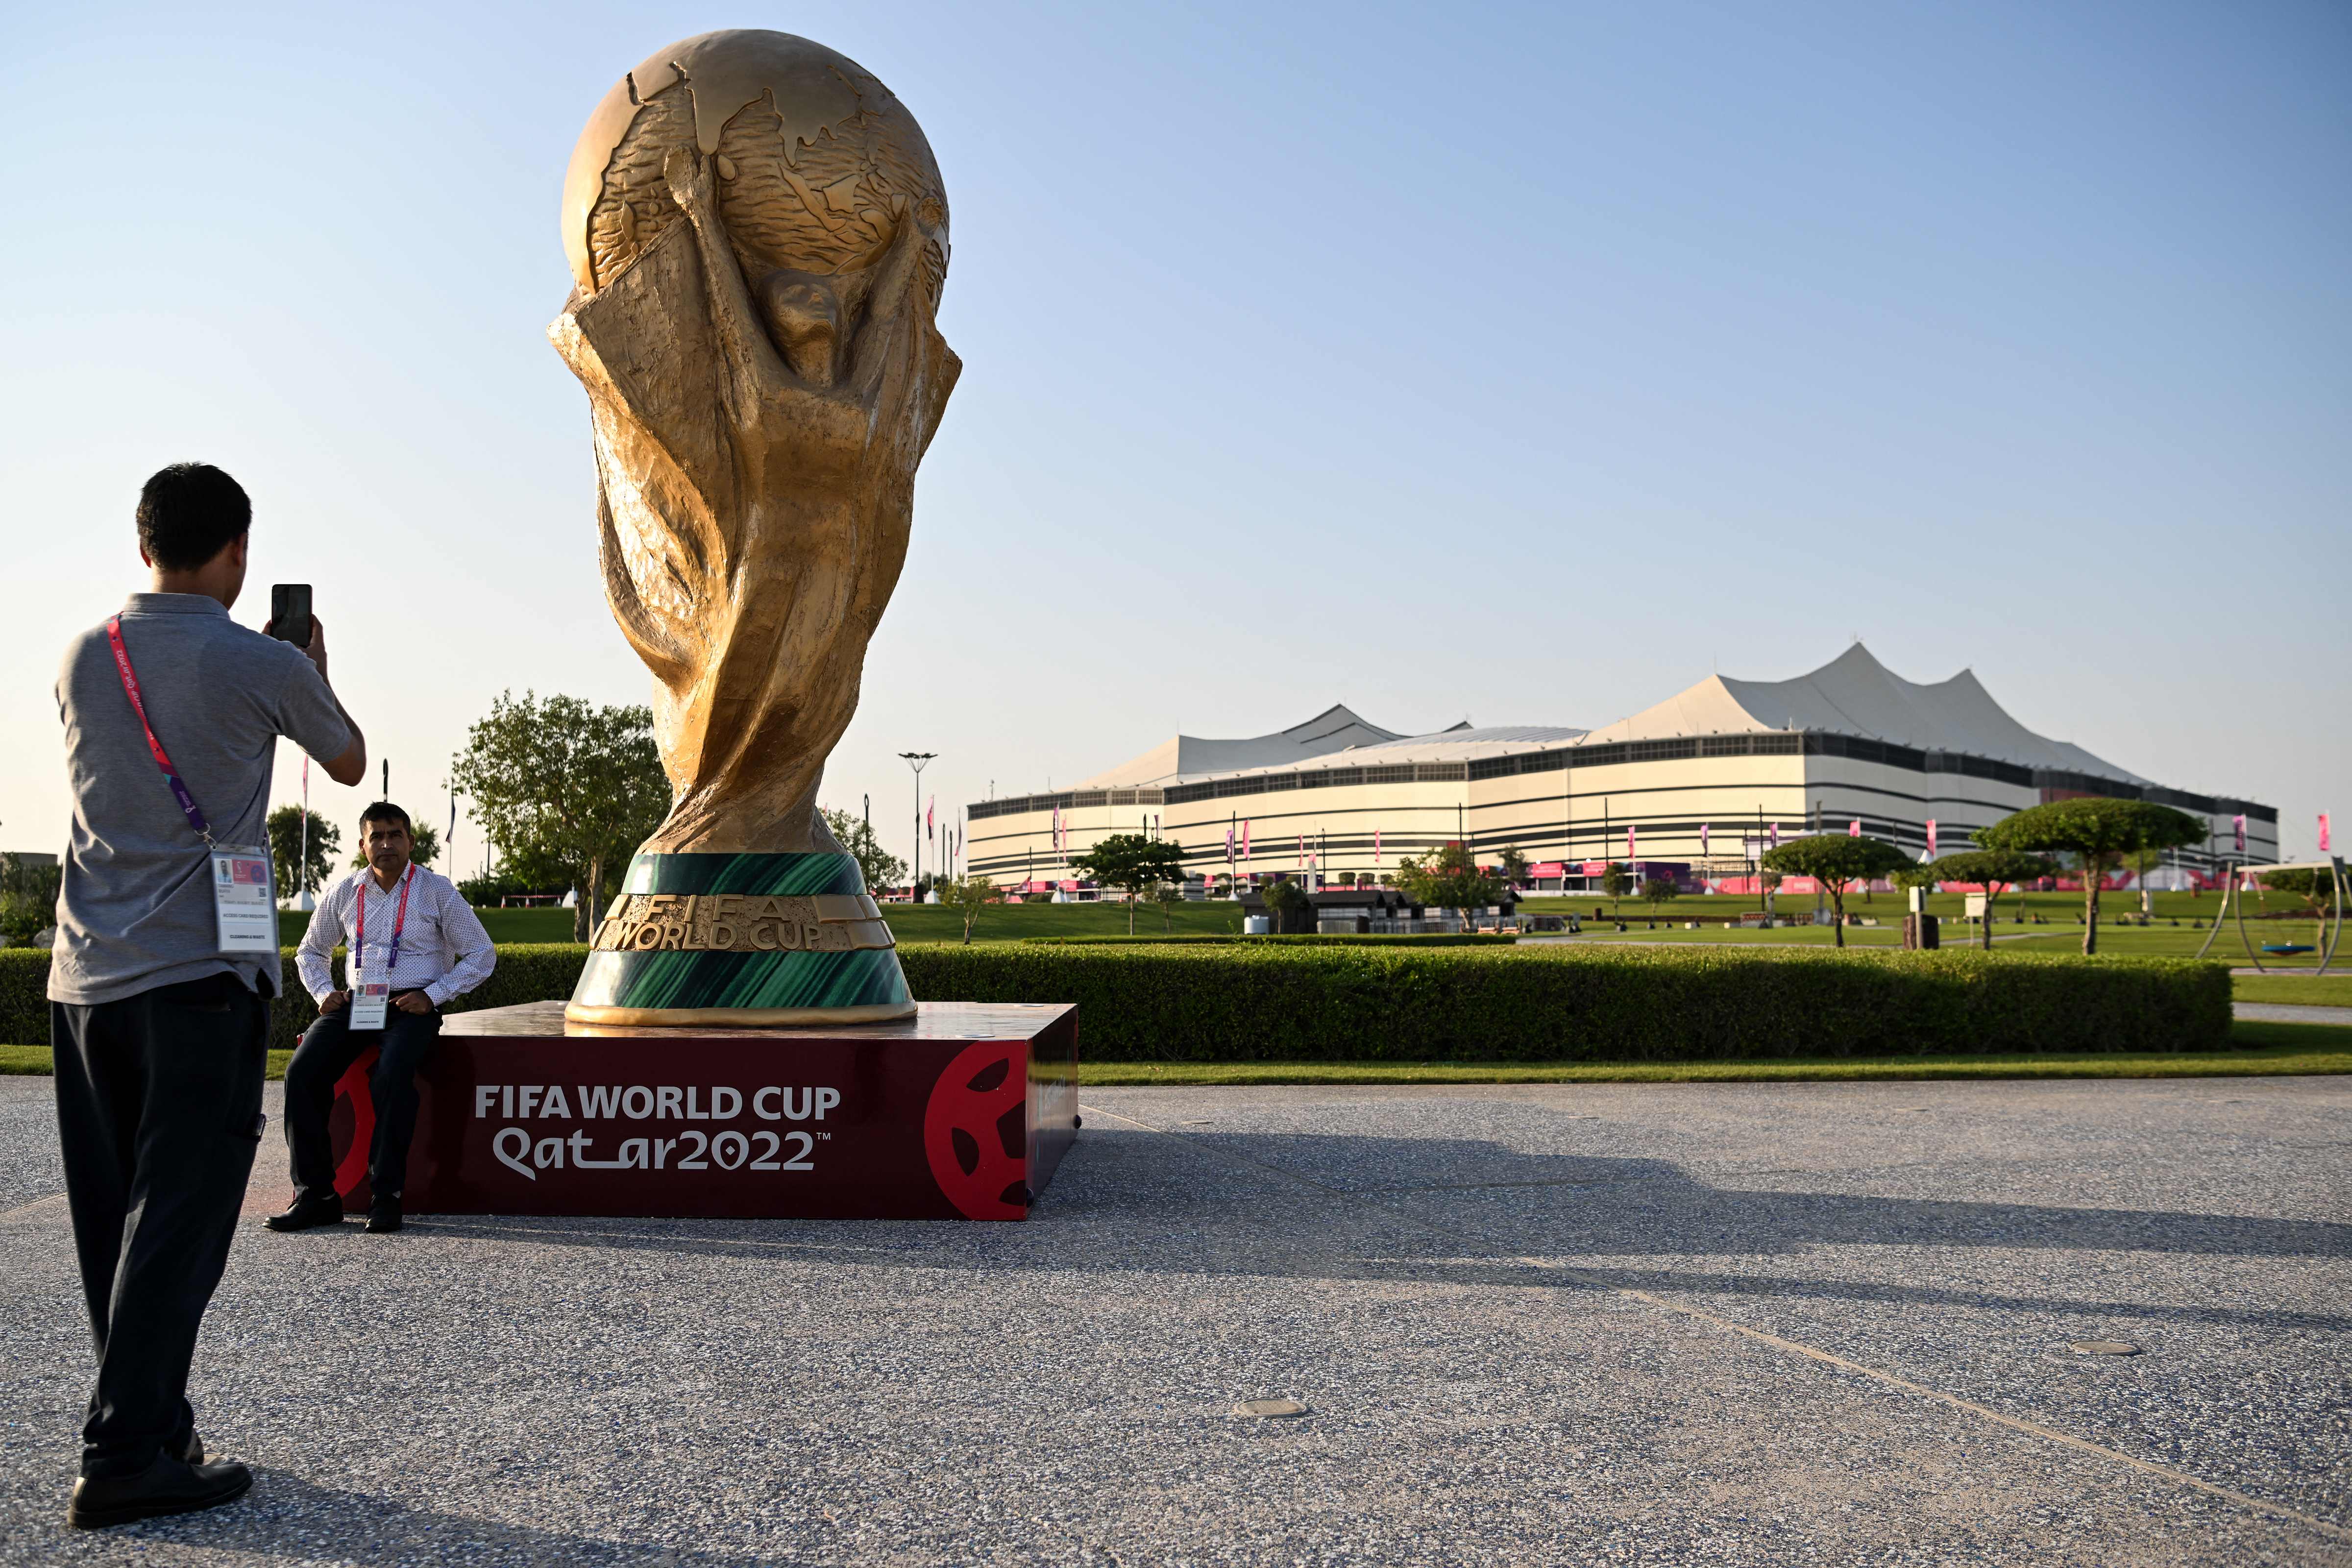 FIFA World Cup 2022 Schedule » Dates & opponents